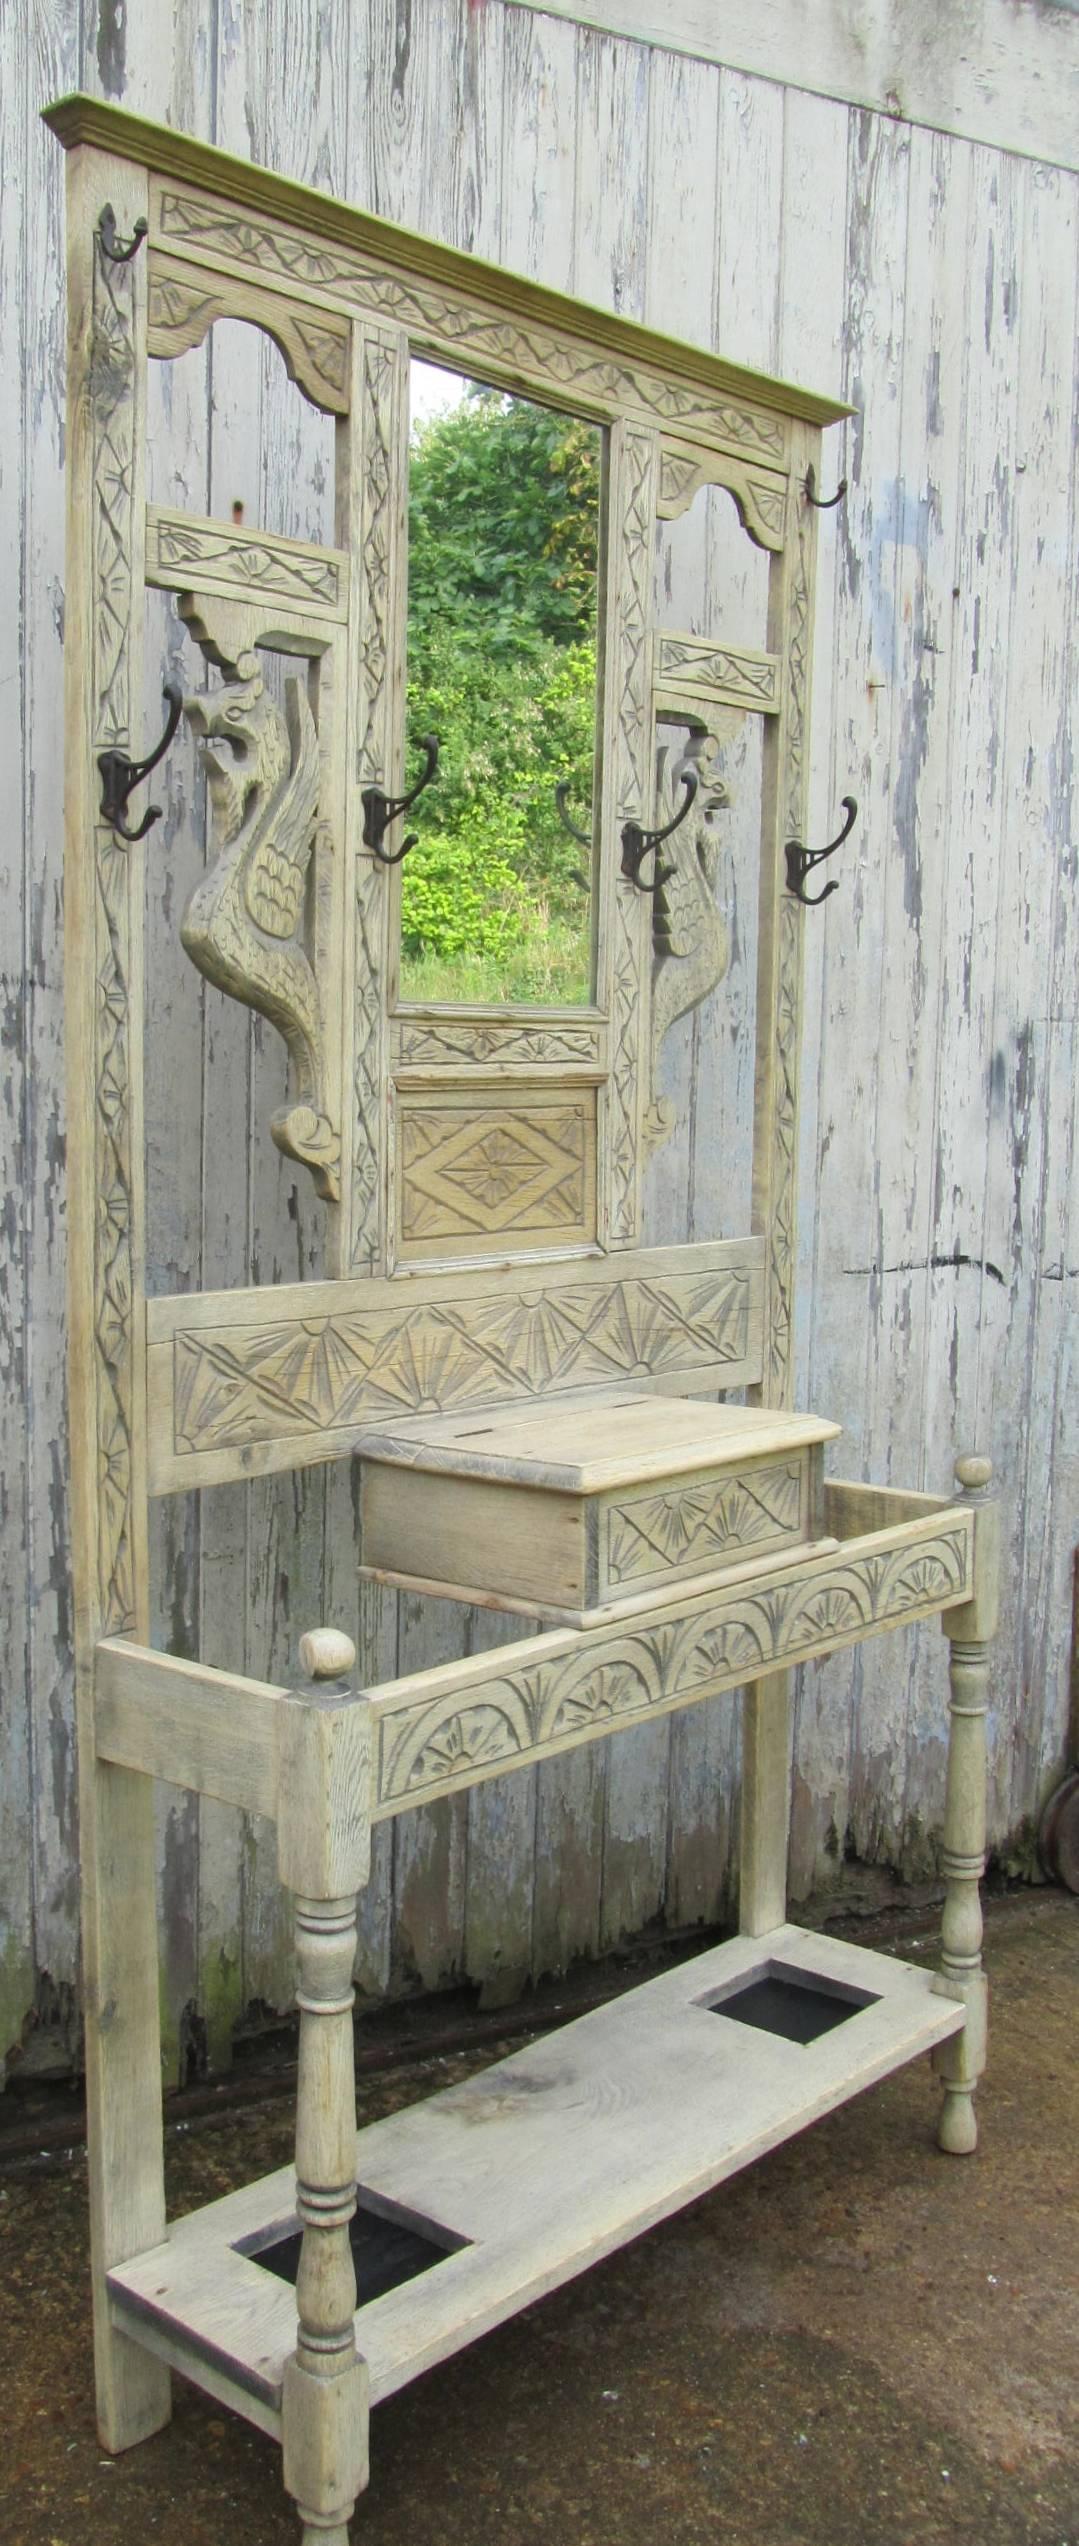 This is a handsome piece, it is carved oak, which has been stripped of its dark color and given a new bleached look. The stand has with six Iron coat hooks, there is a mirror in the centre flanked by carvings of mythical dragons. The lower section